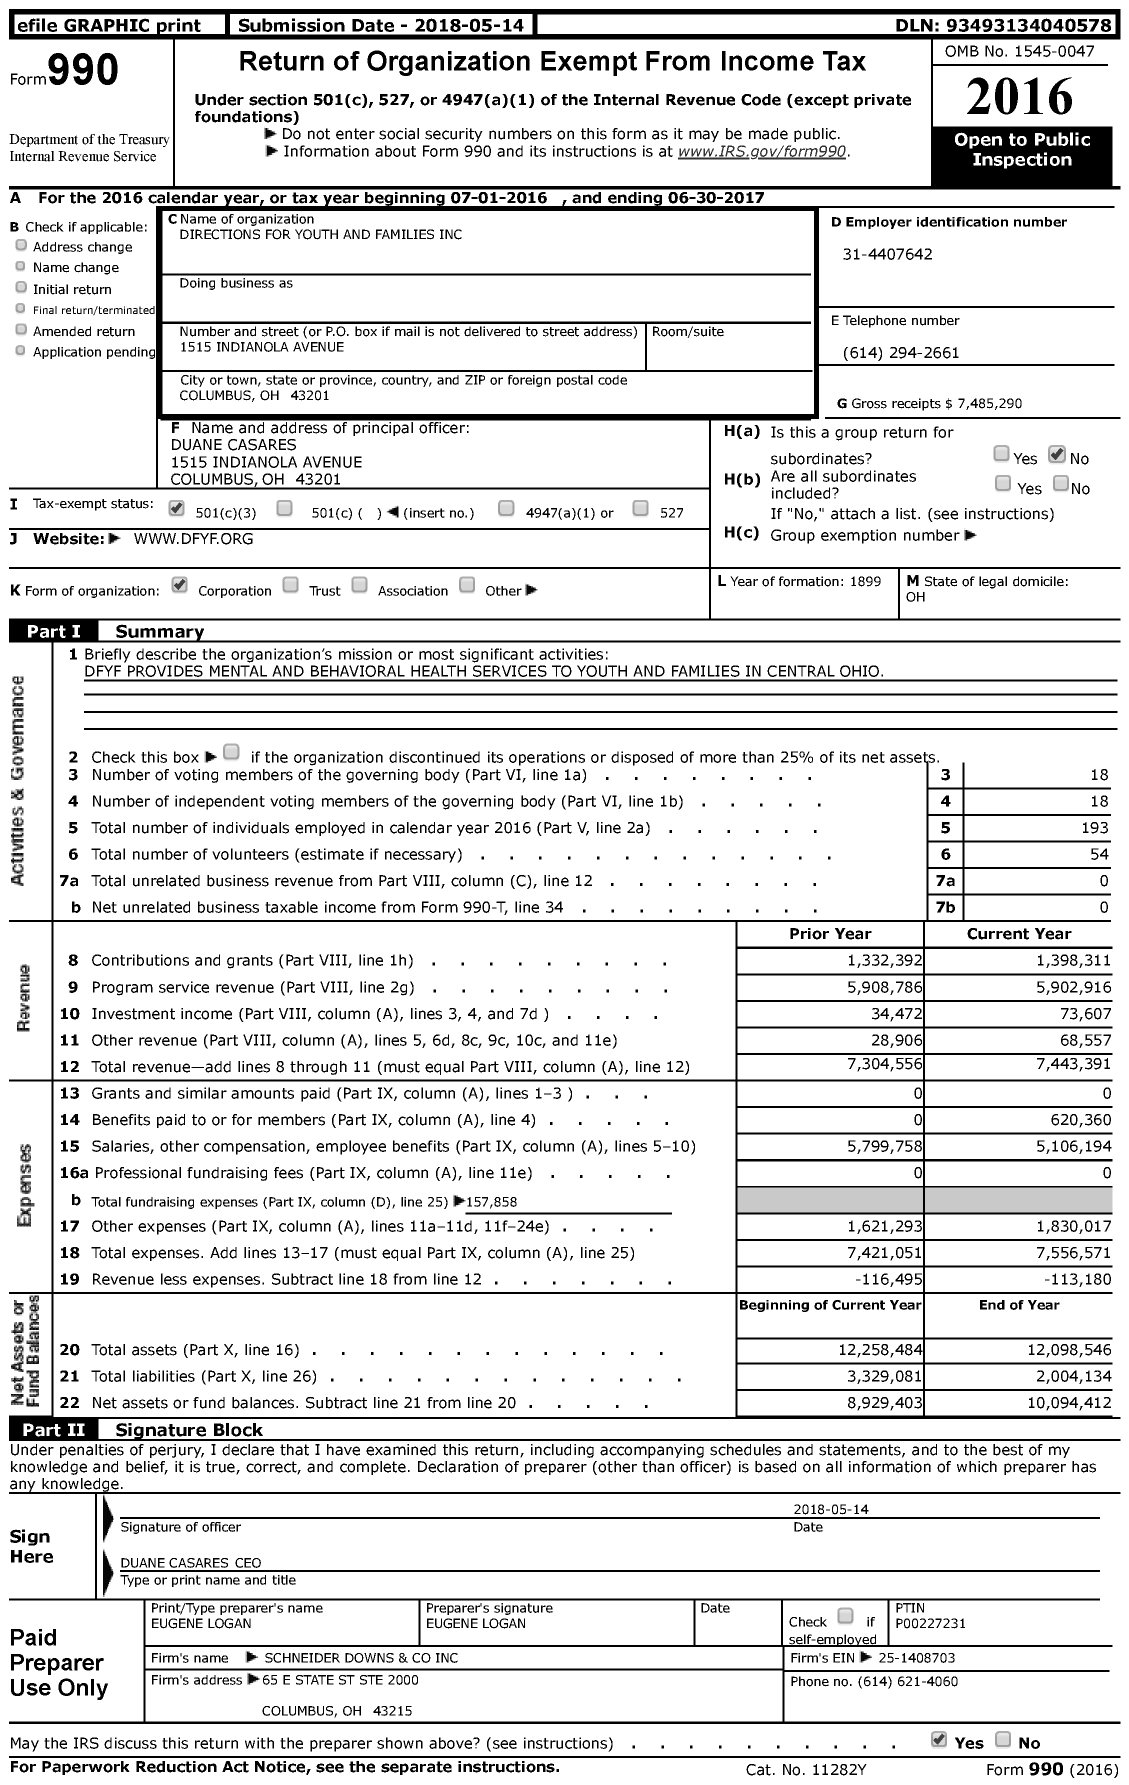 Image of first page of 2016 Form 990 for Directions for Youth & Families (DFYF)